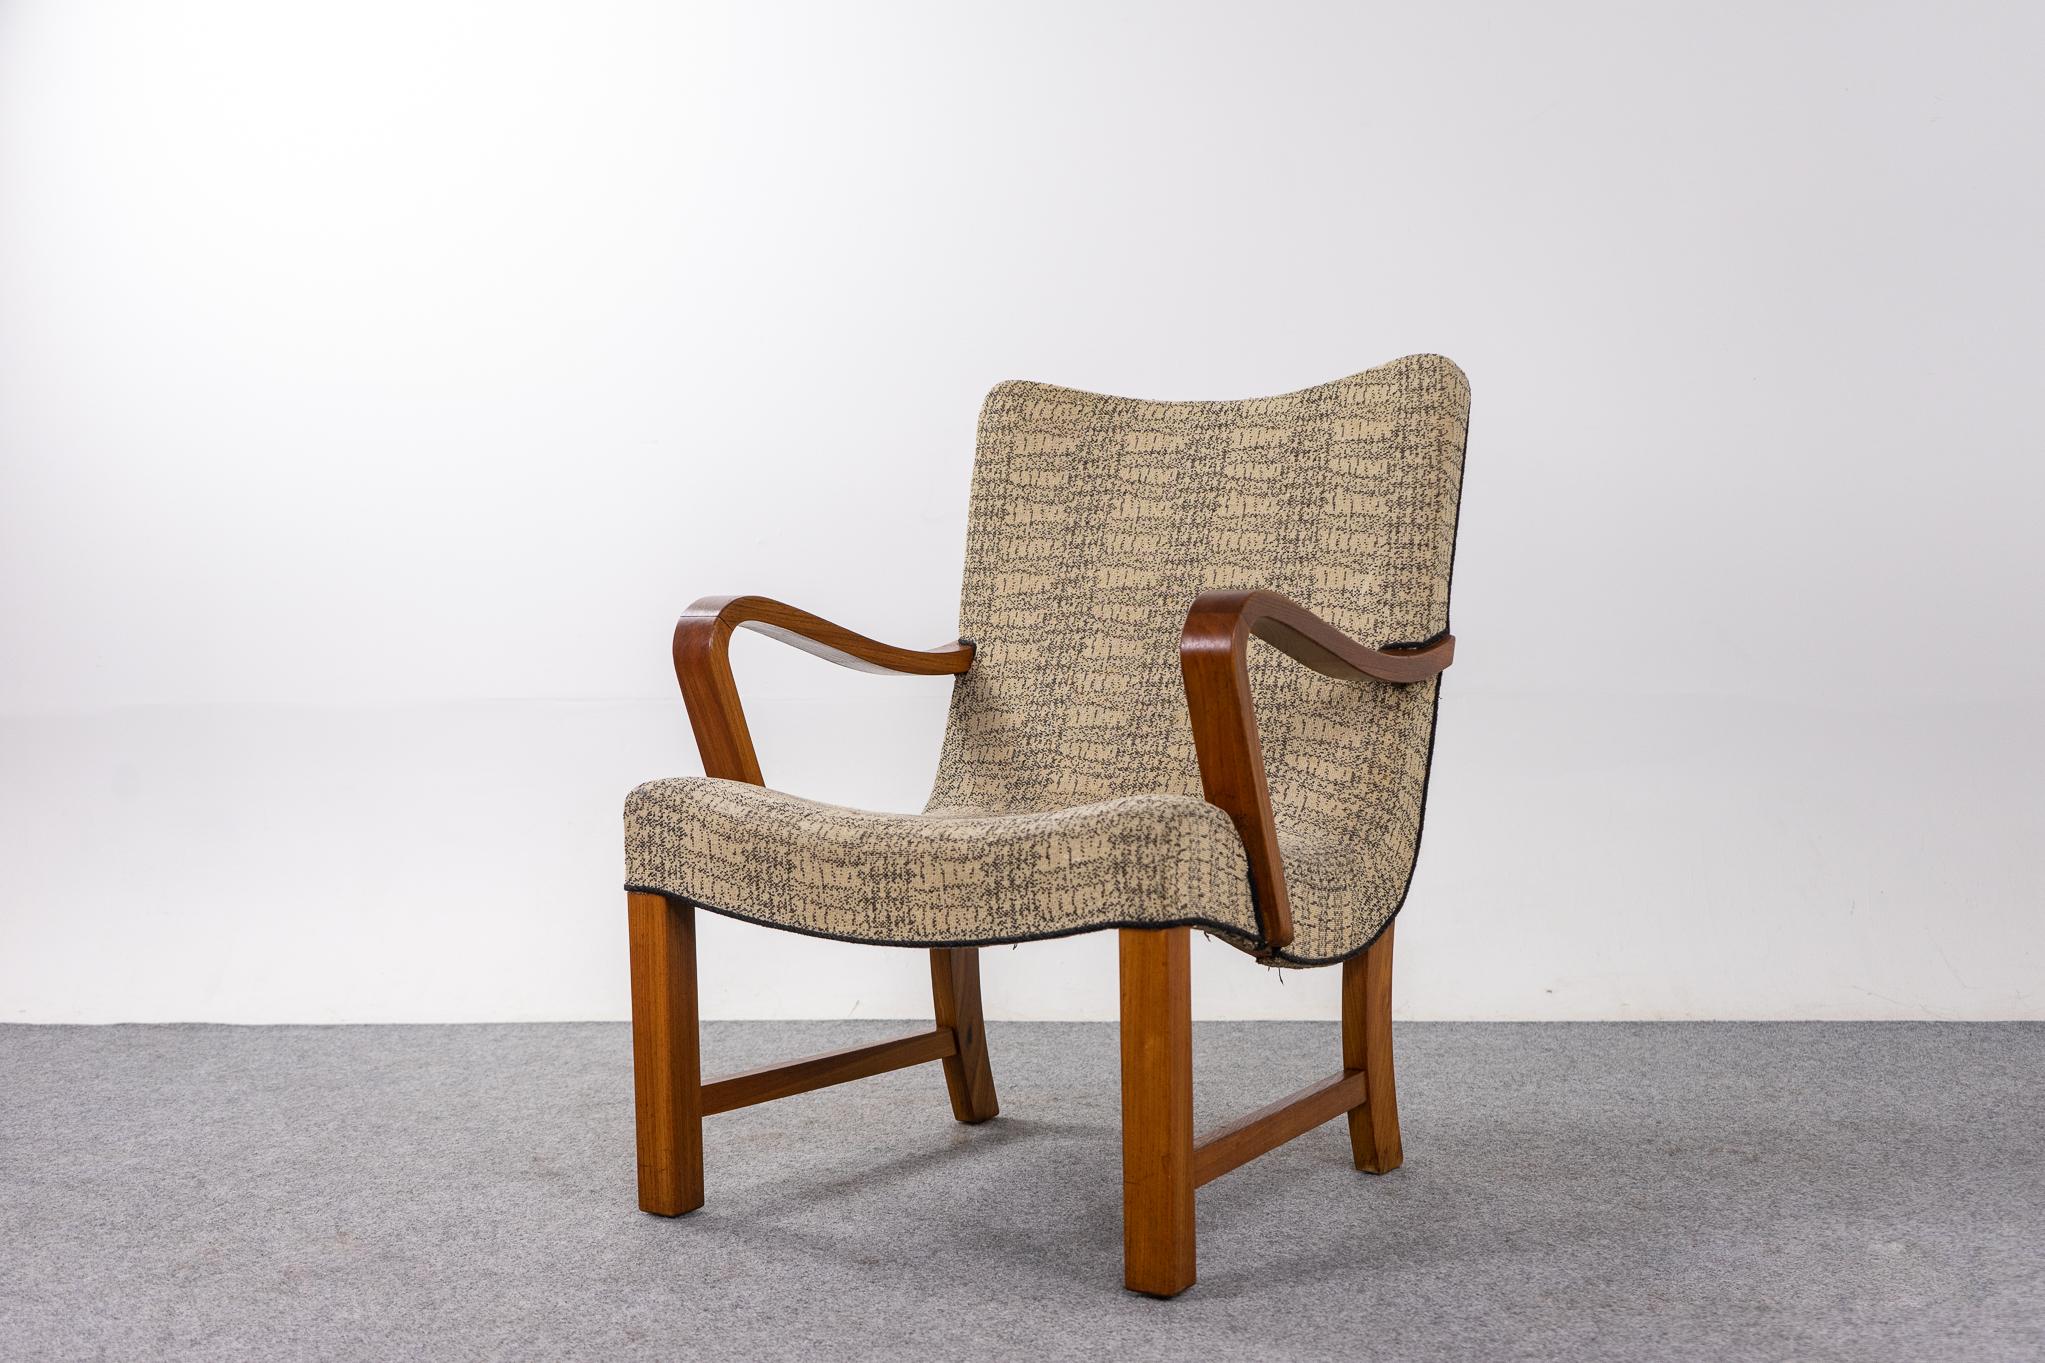 Elm Danish modern lounge chair, circa 1960's. Unique chair, curvy arms that are echoed in the body of the chair, a modern and whimsical feeling! Sturdy and structurally sound, original fabric upholstery. Some marks consistent with age and